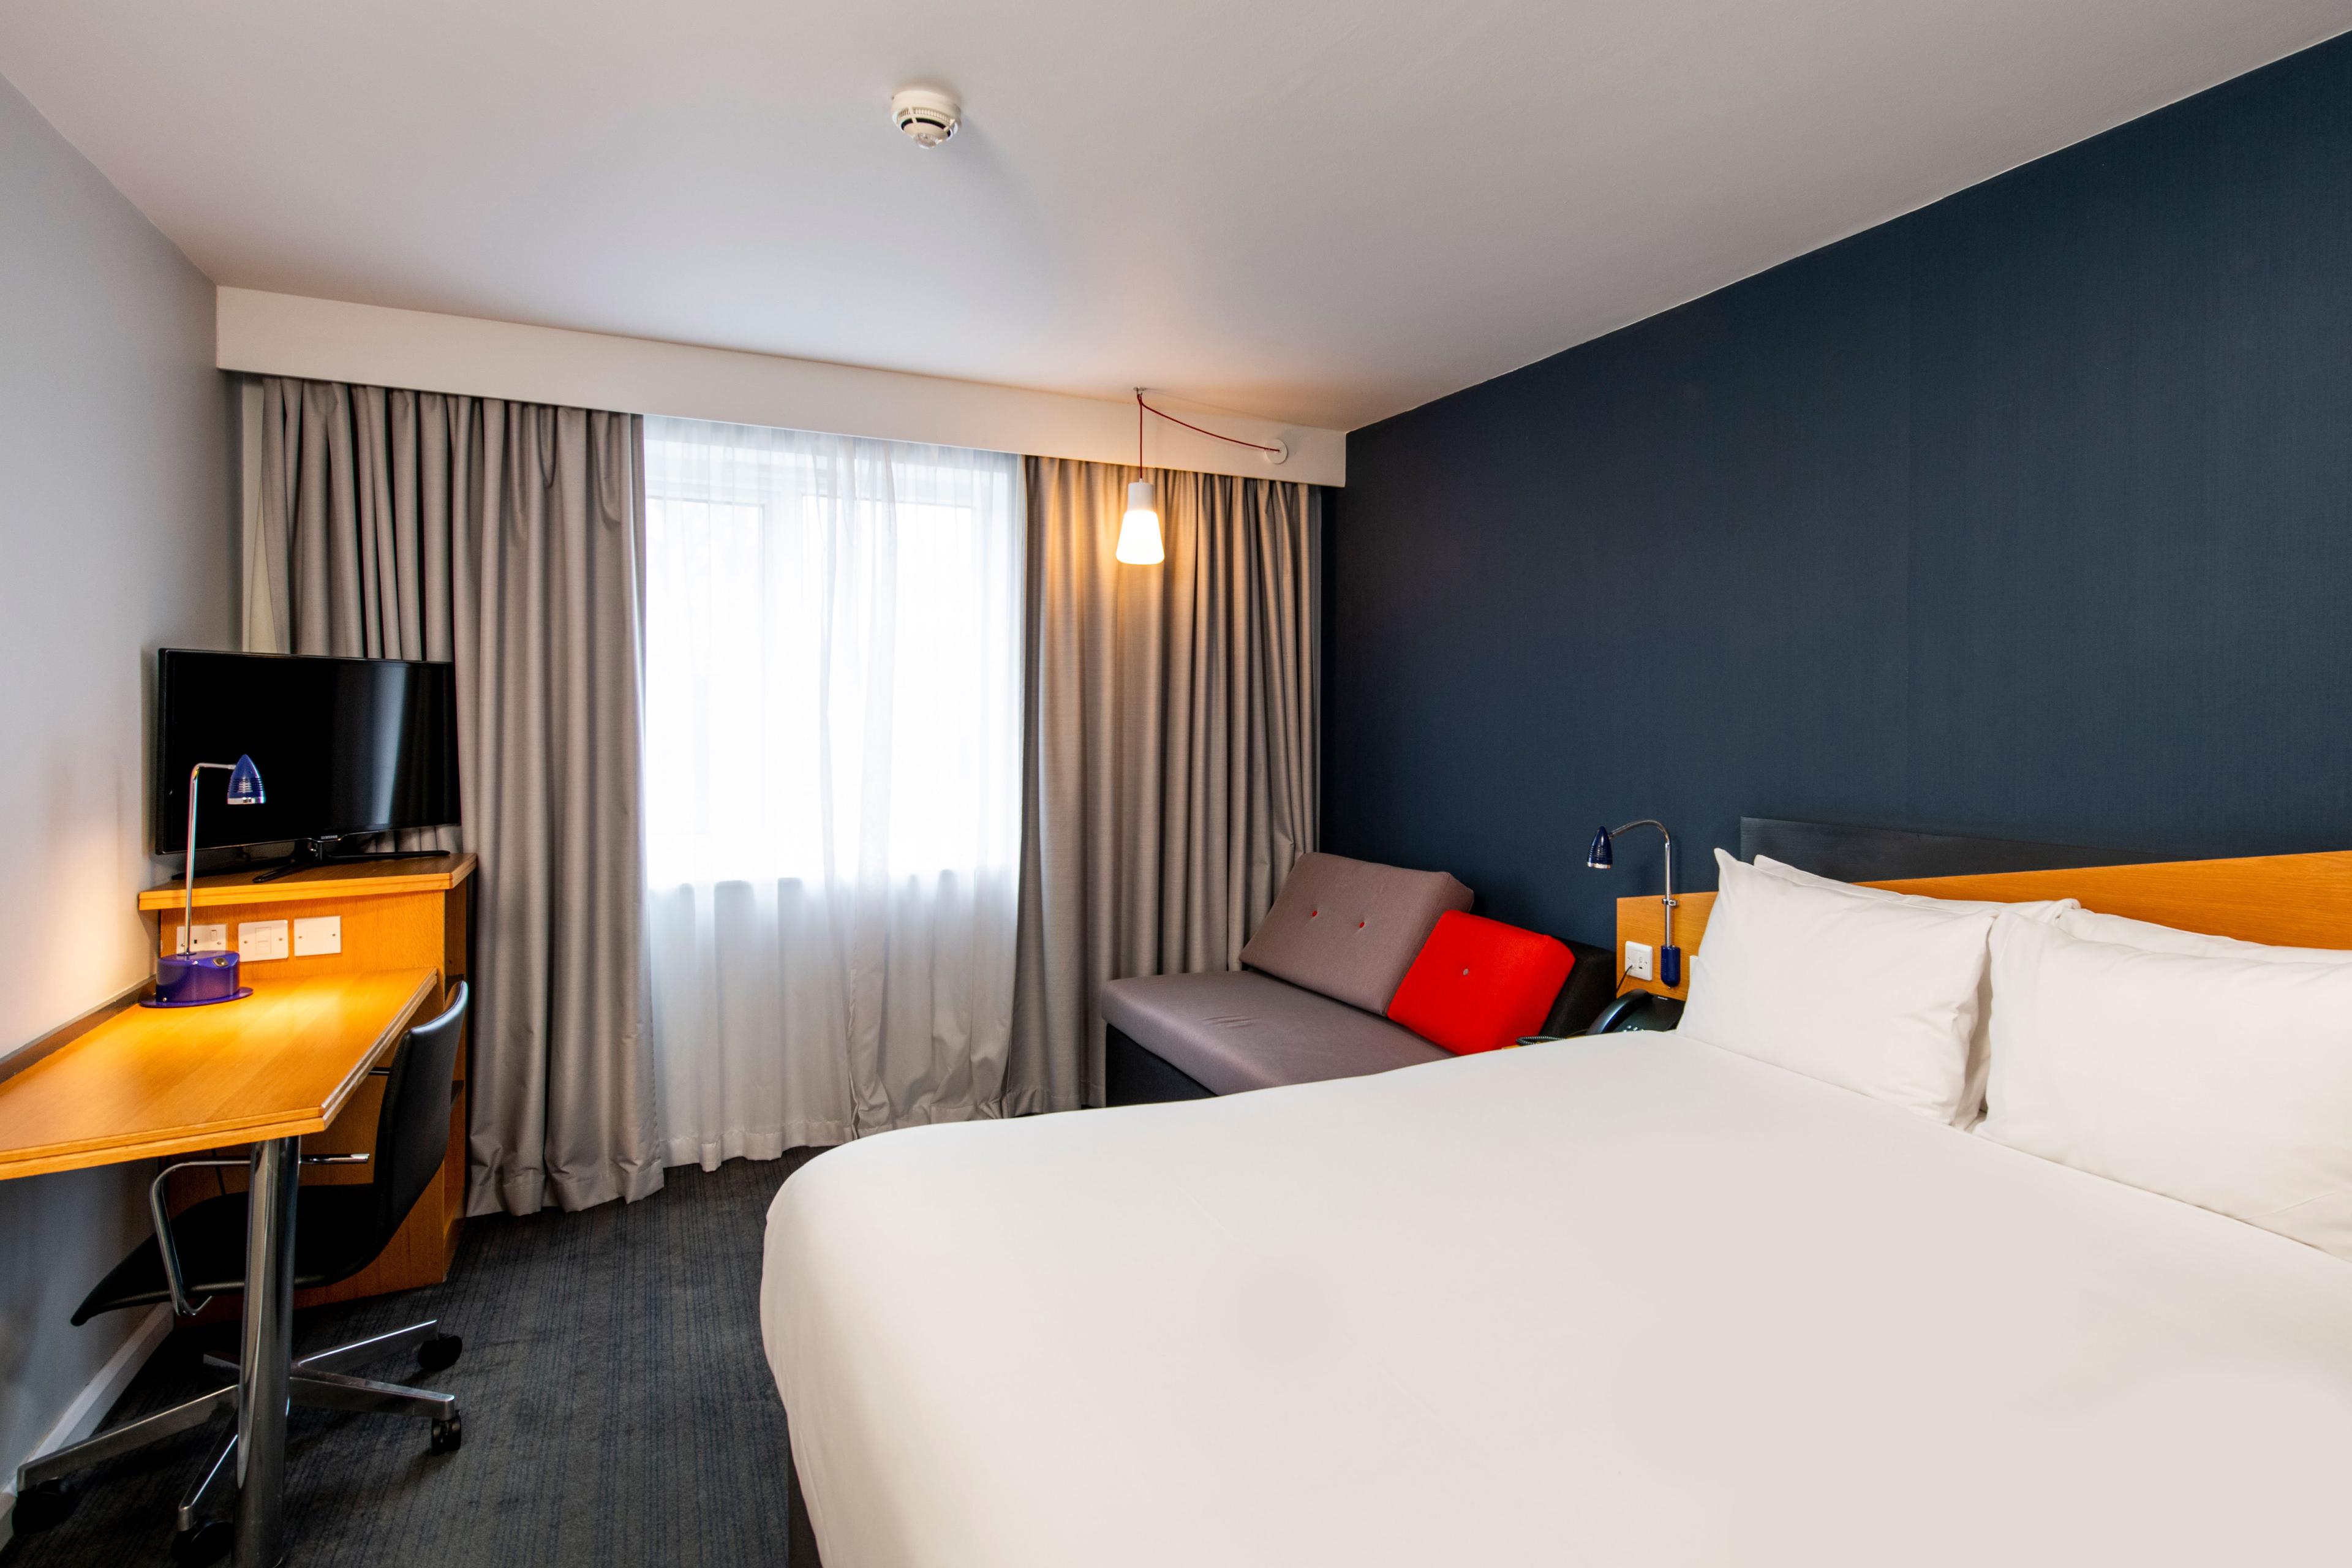 Our Leeds hotel rooms include free Wi-Fi and air conditioning.